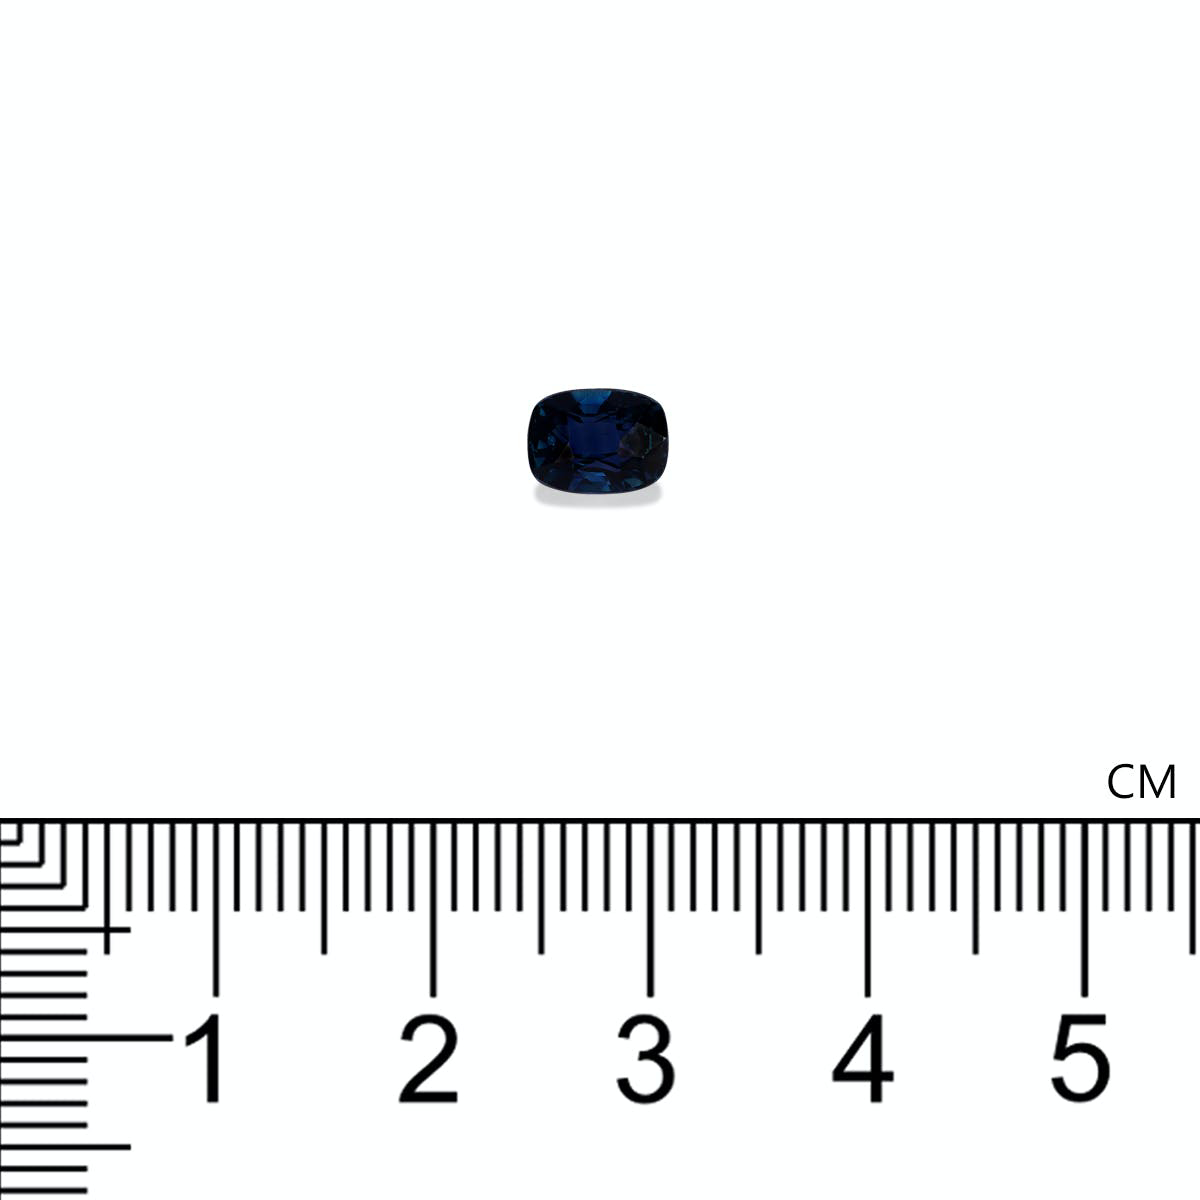 Picture of Blue Sapphire Unheated Madagascar 1.14ct (BS0223)